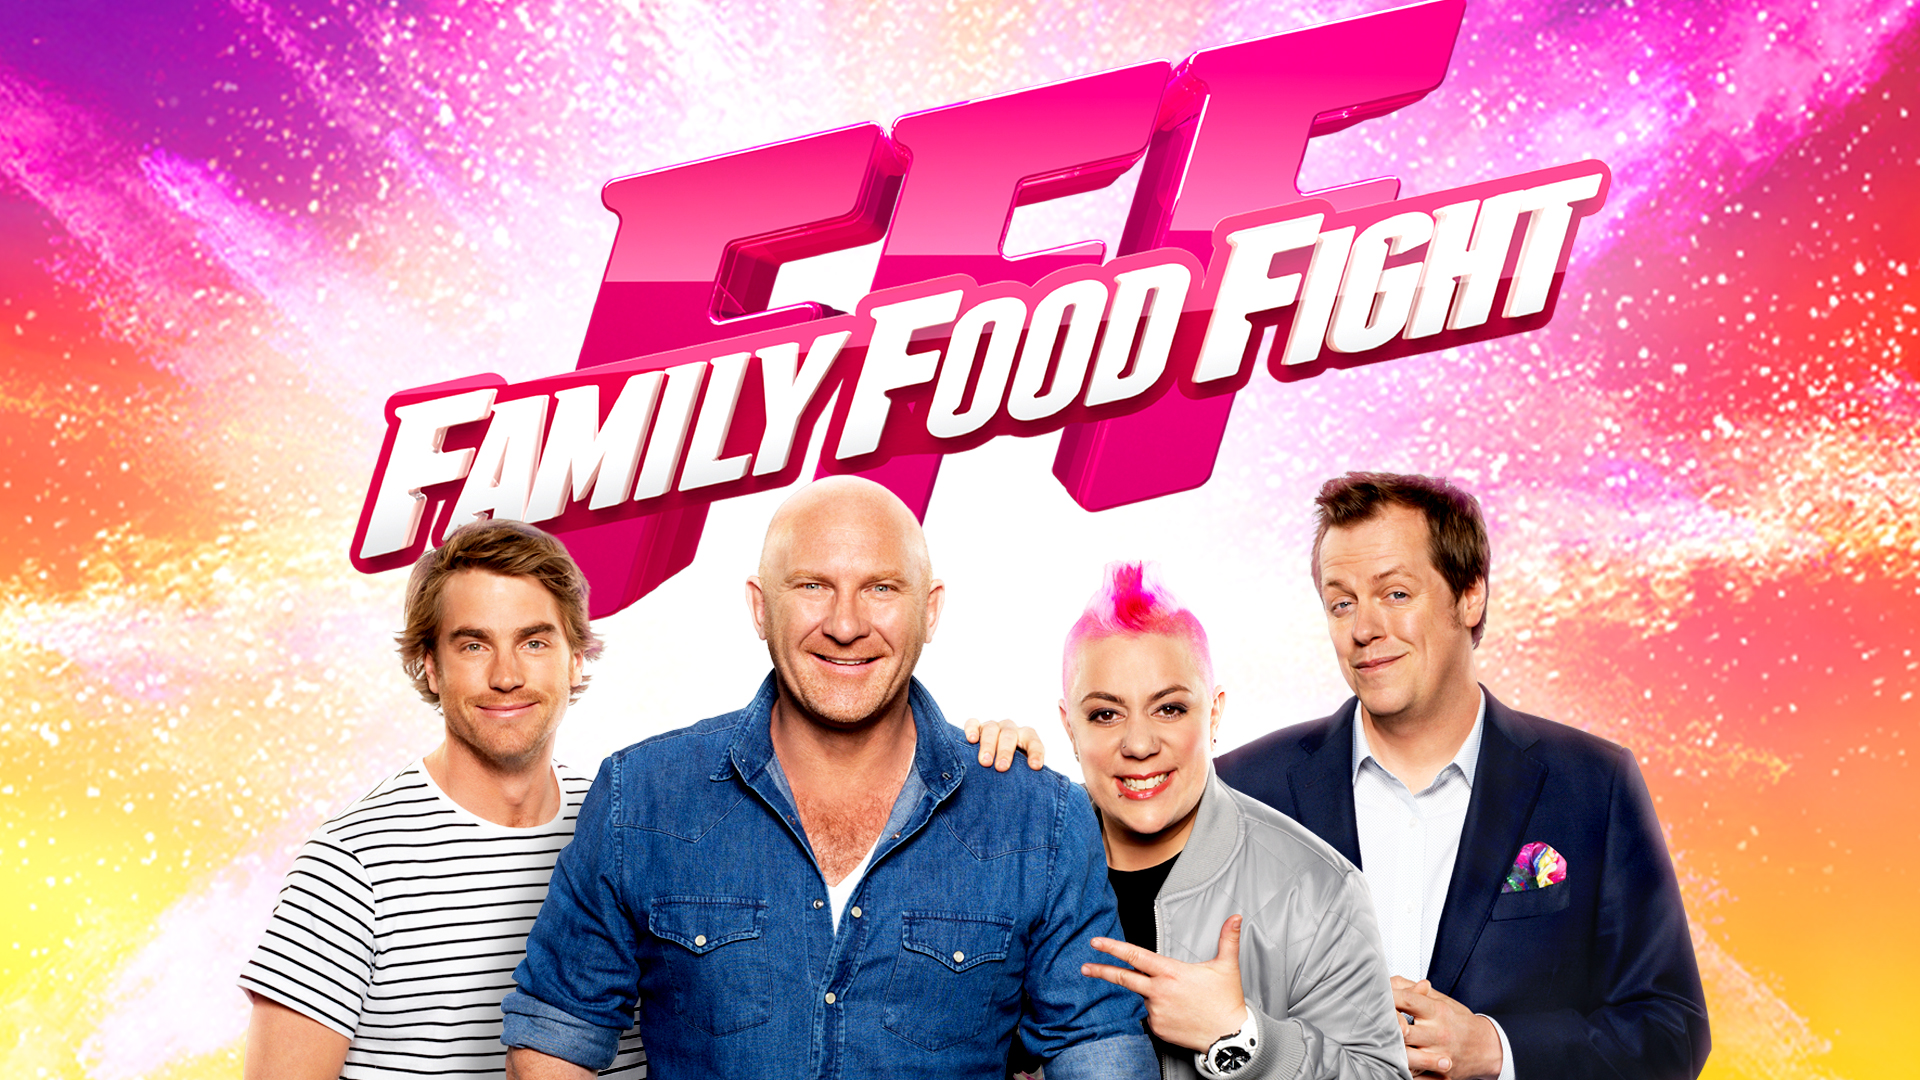 Family Food Fight judges